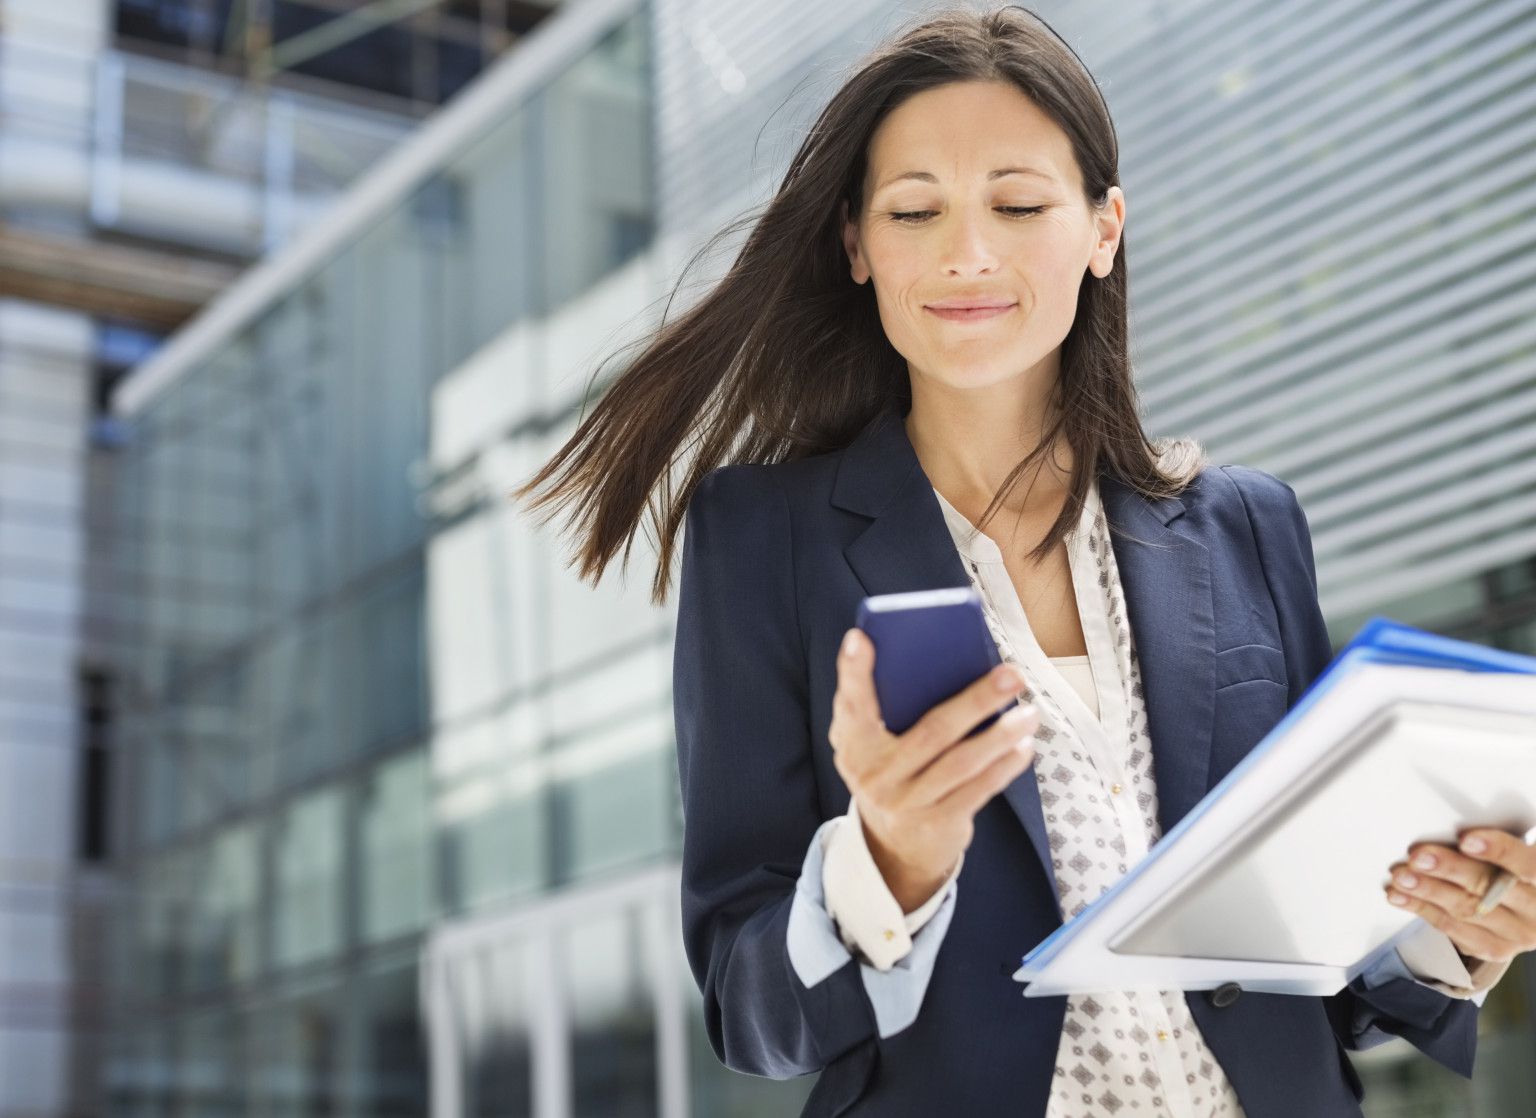 Best Business Opportunities for Women in 2015 | TheSelfEmployed.com